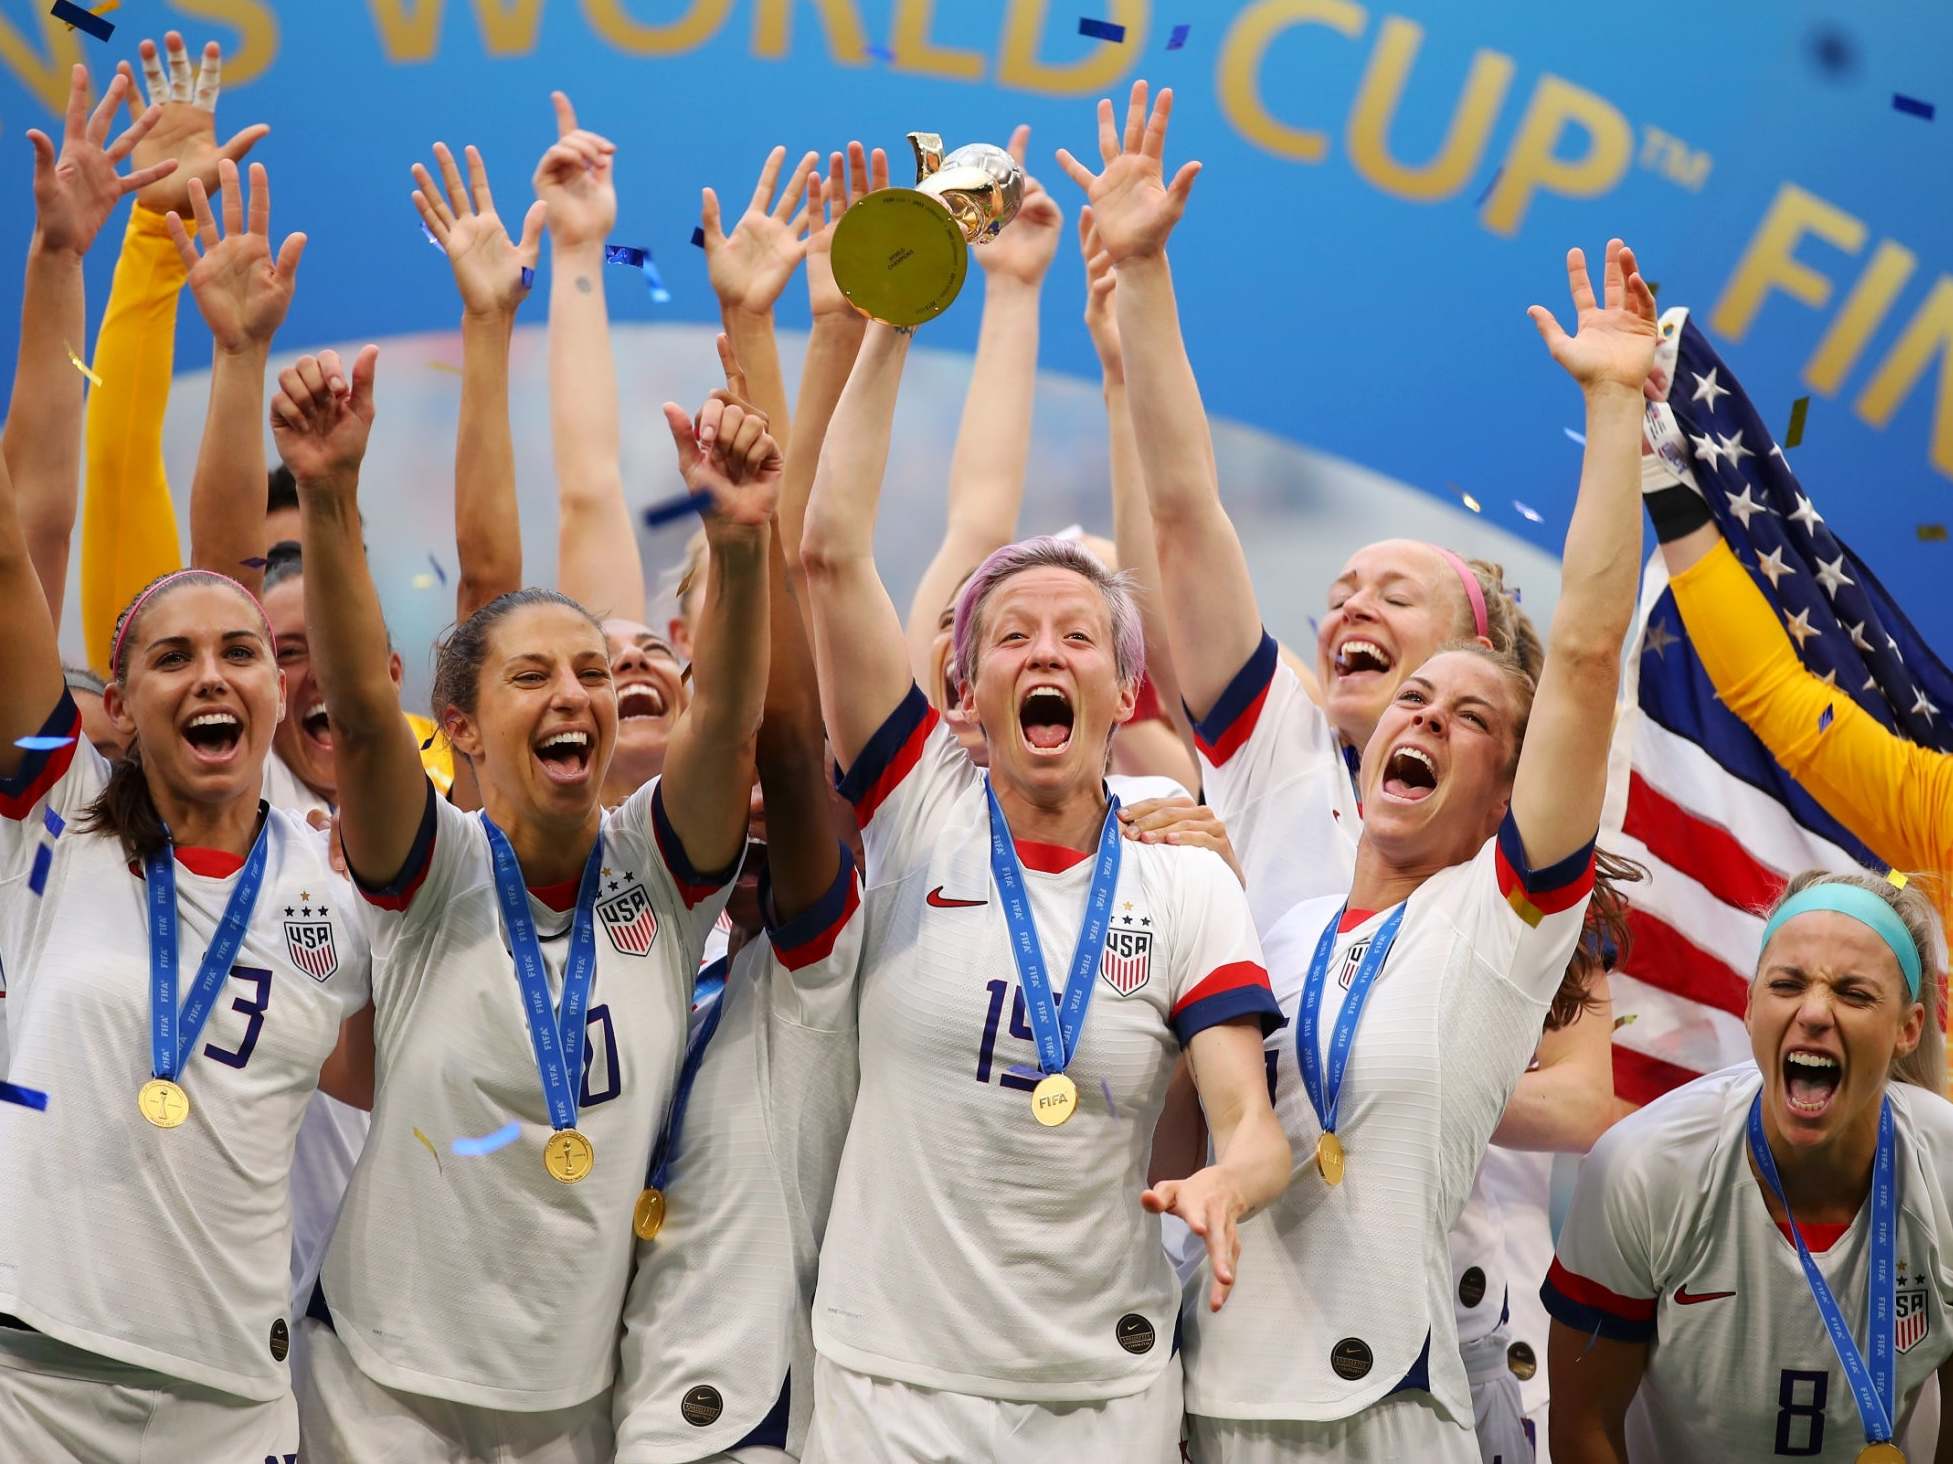 USA vs Netherlands result: United States win Women's World Cup after